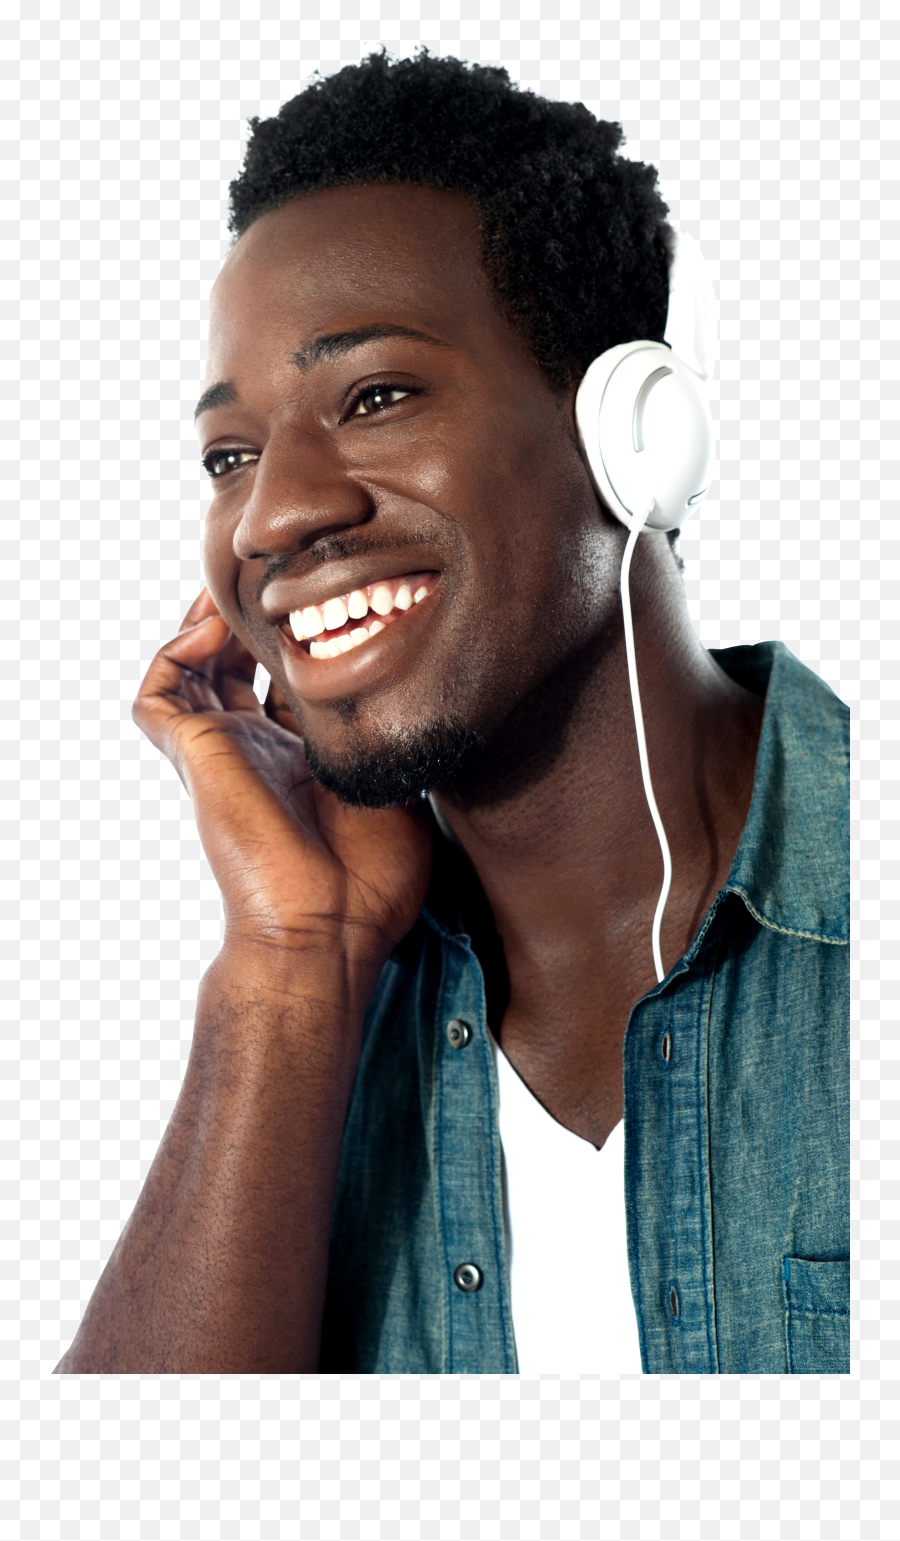 Listening Music Png Images Transparent Background Play - Music Listening With Headphones Photo Hd,Headphone Transparent Background